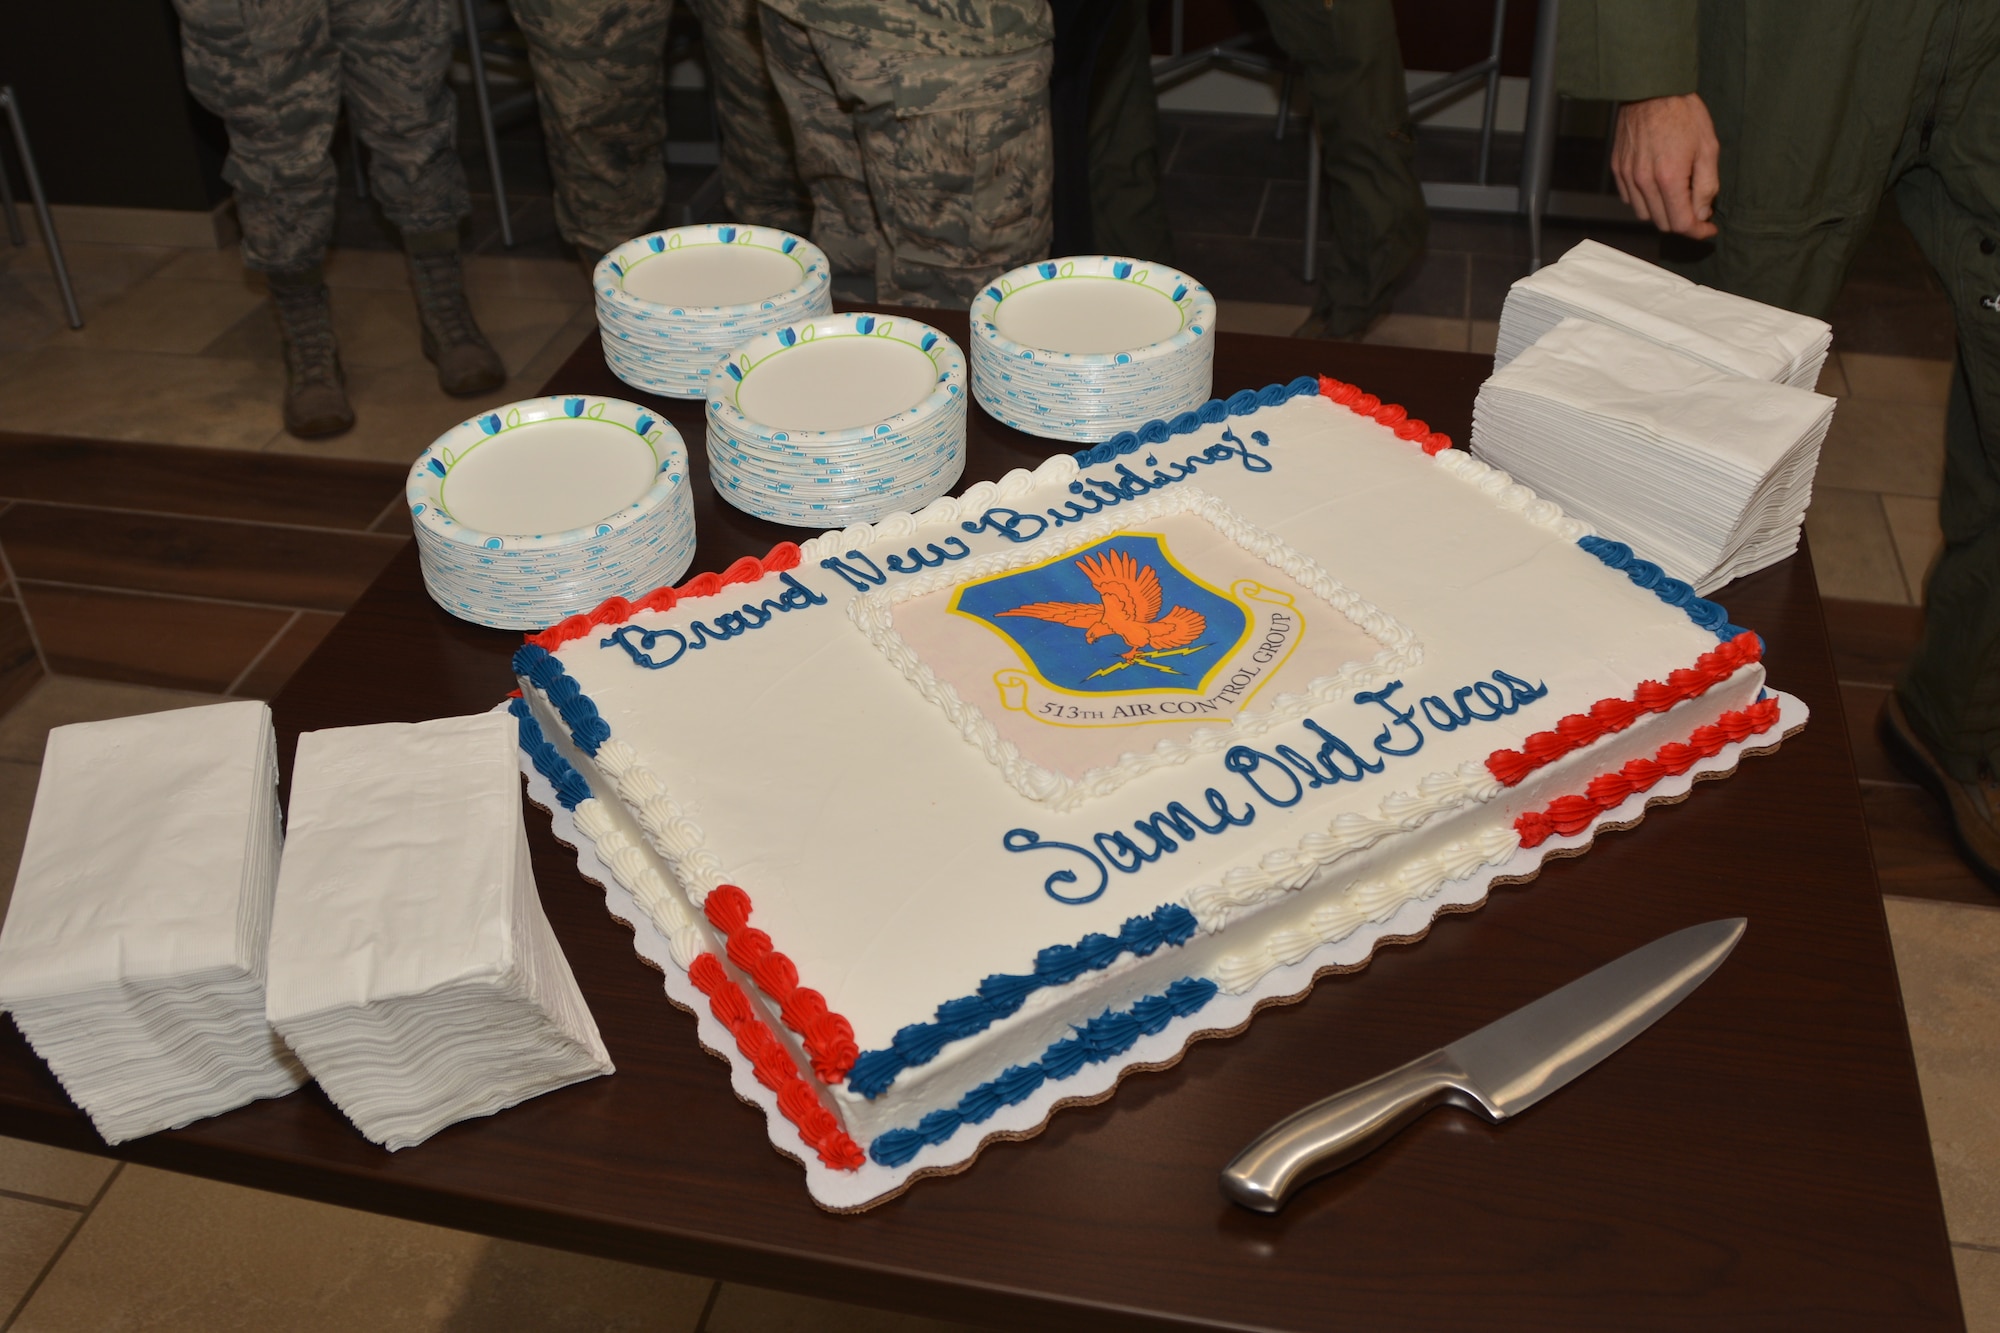 Members of the 513th Air Control Group gather at a ribbon-cutting ceremony with refreshments Sept. 7, 2018, at Tinker Air Force Base, Oklahoma. The 513th Air Control Group is the only Air Force Reserve unit to fly and maintain the E-3 Sentry, an Airborne Warning and Control System aircraft that provides surveillance, warning and tactical control of U.S. and allied military aircraft. As a Reserve Associate Unit, 513th ACG Airmen assigned work hand-in-hand with the active-duty 552nd Air Control Wing, contributing reliable AWACS support to numerous missions worldwide regularly. (Air Force photo by Master Sgt. Grady Epperly)